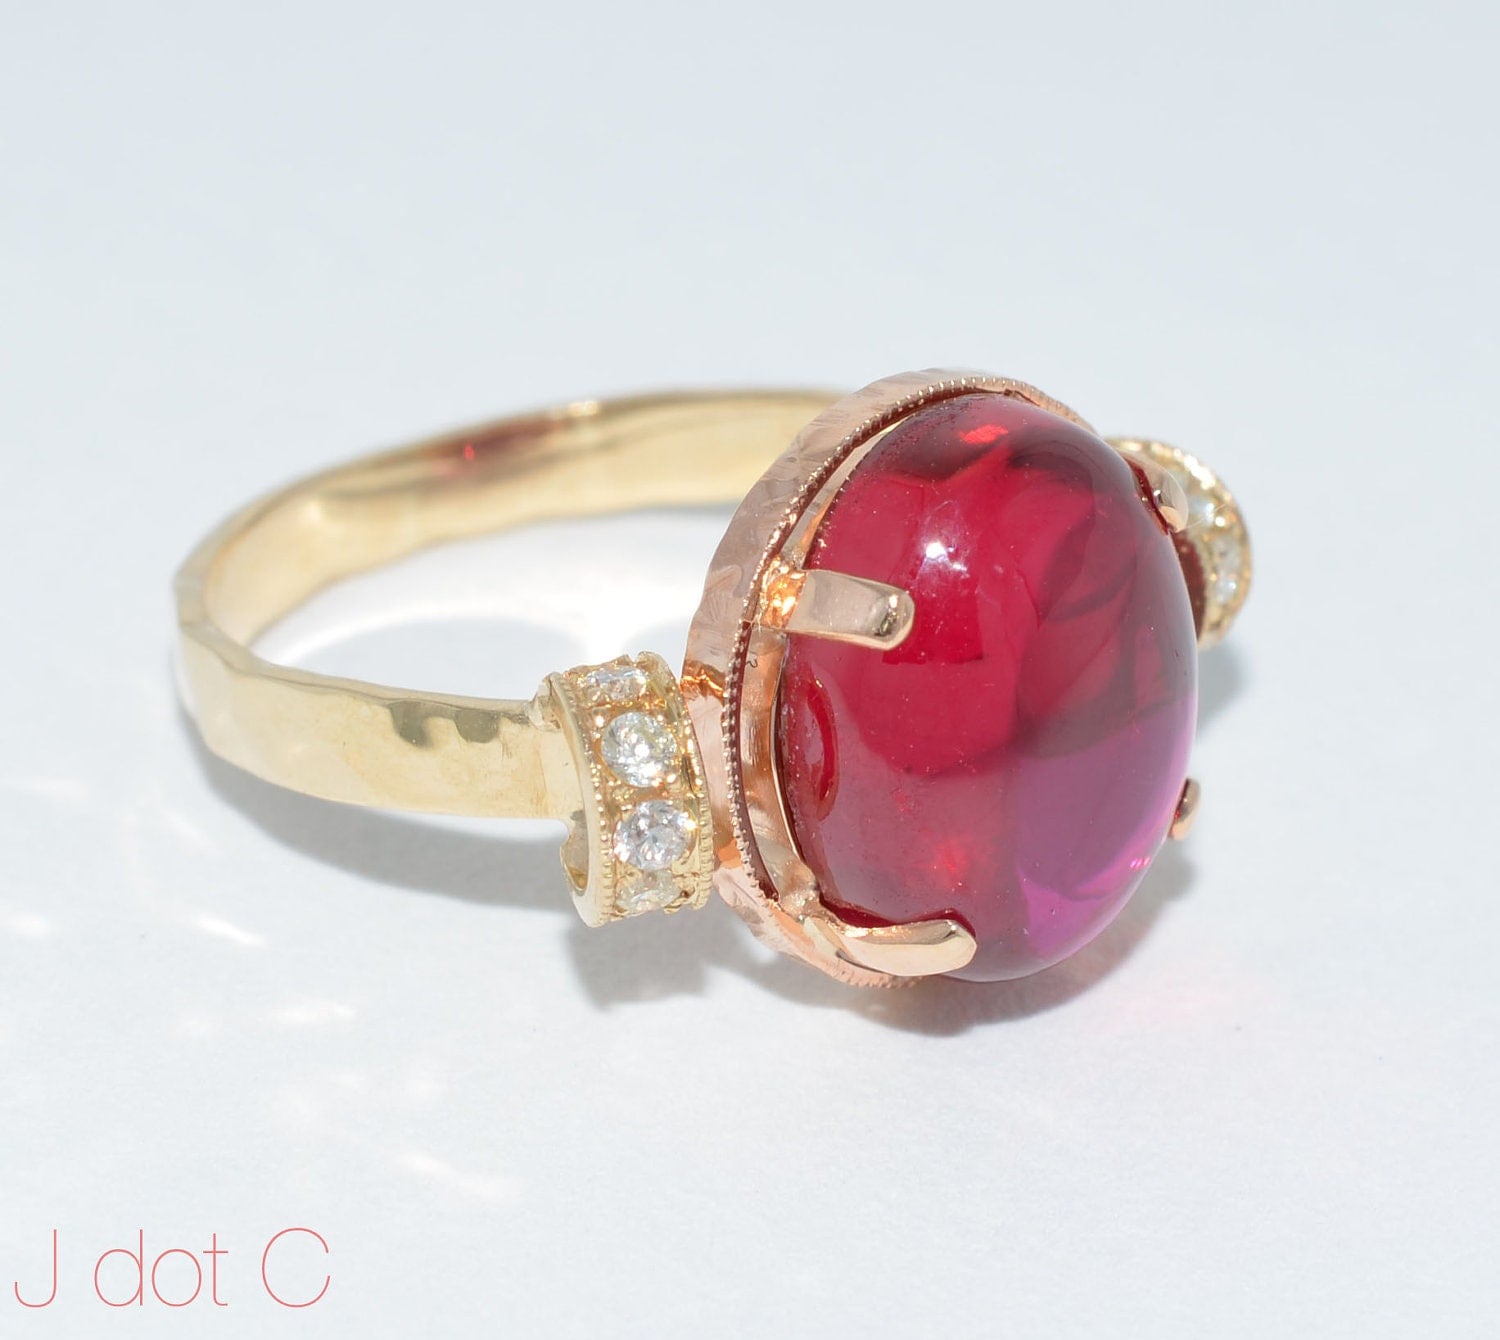 Cabochon Ruby and Diamond Ring 18k and 24k Yellow Gold